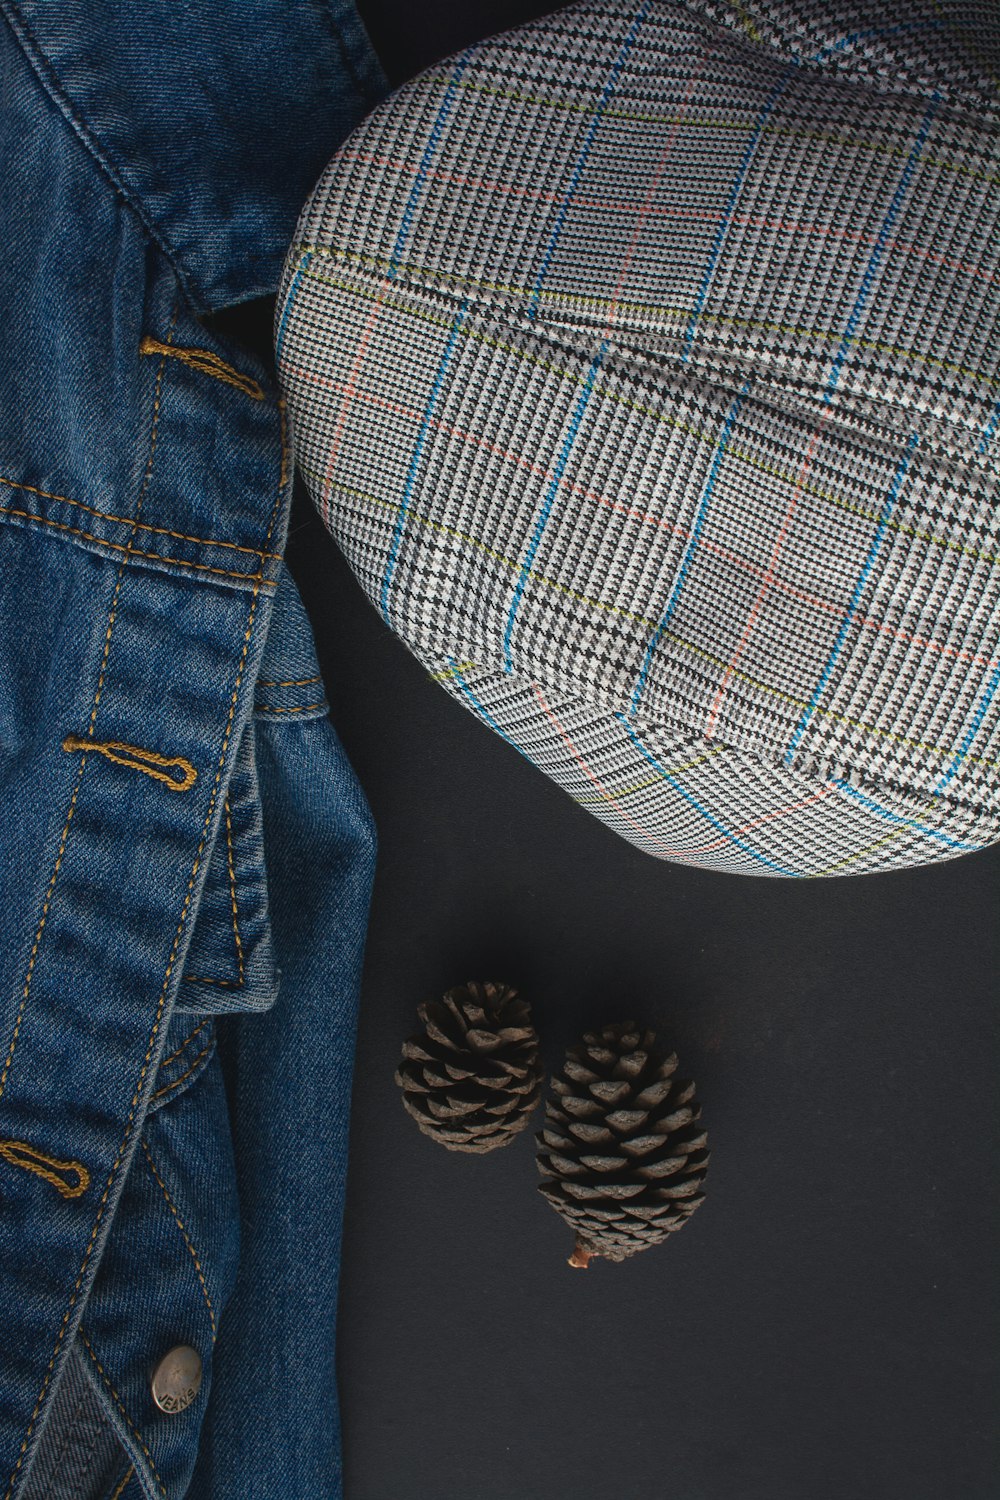 a pair of pine cones sitting on top of a pair of jeans